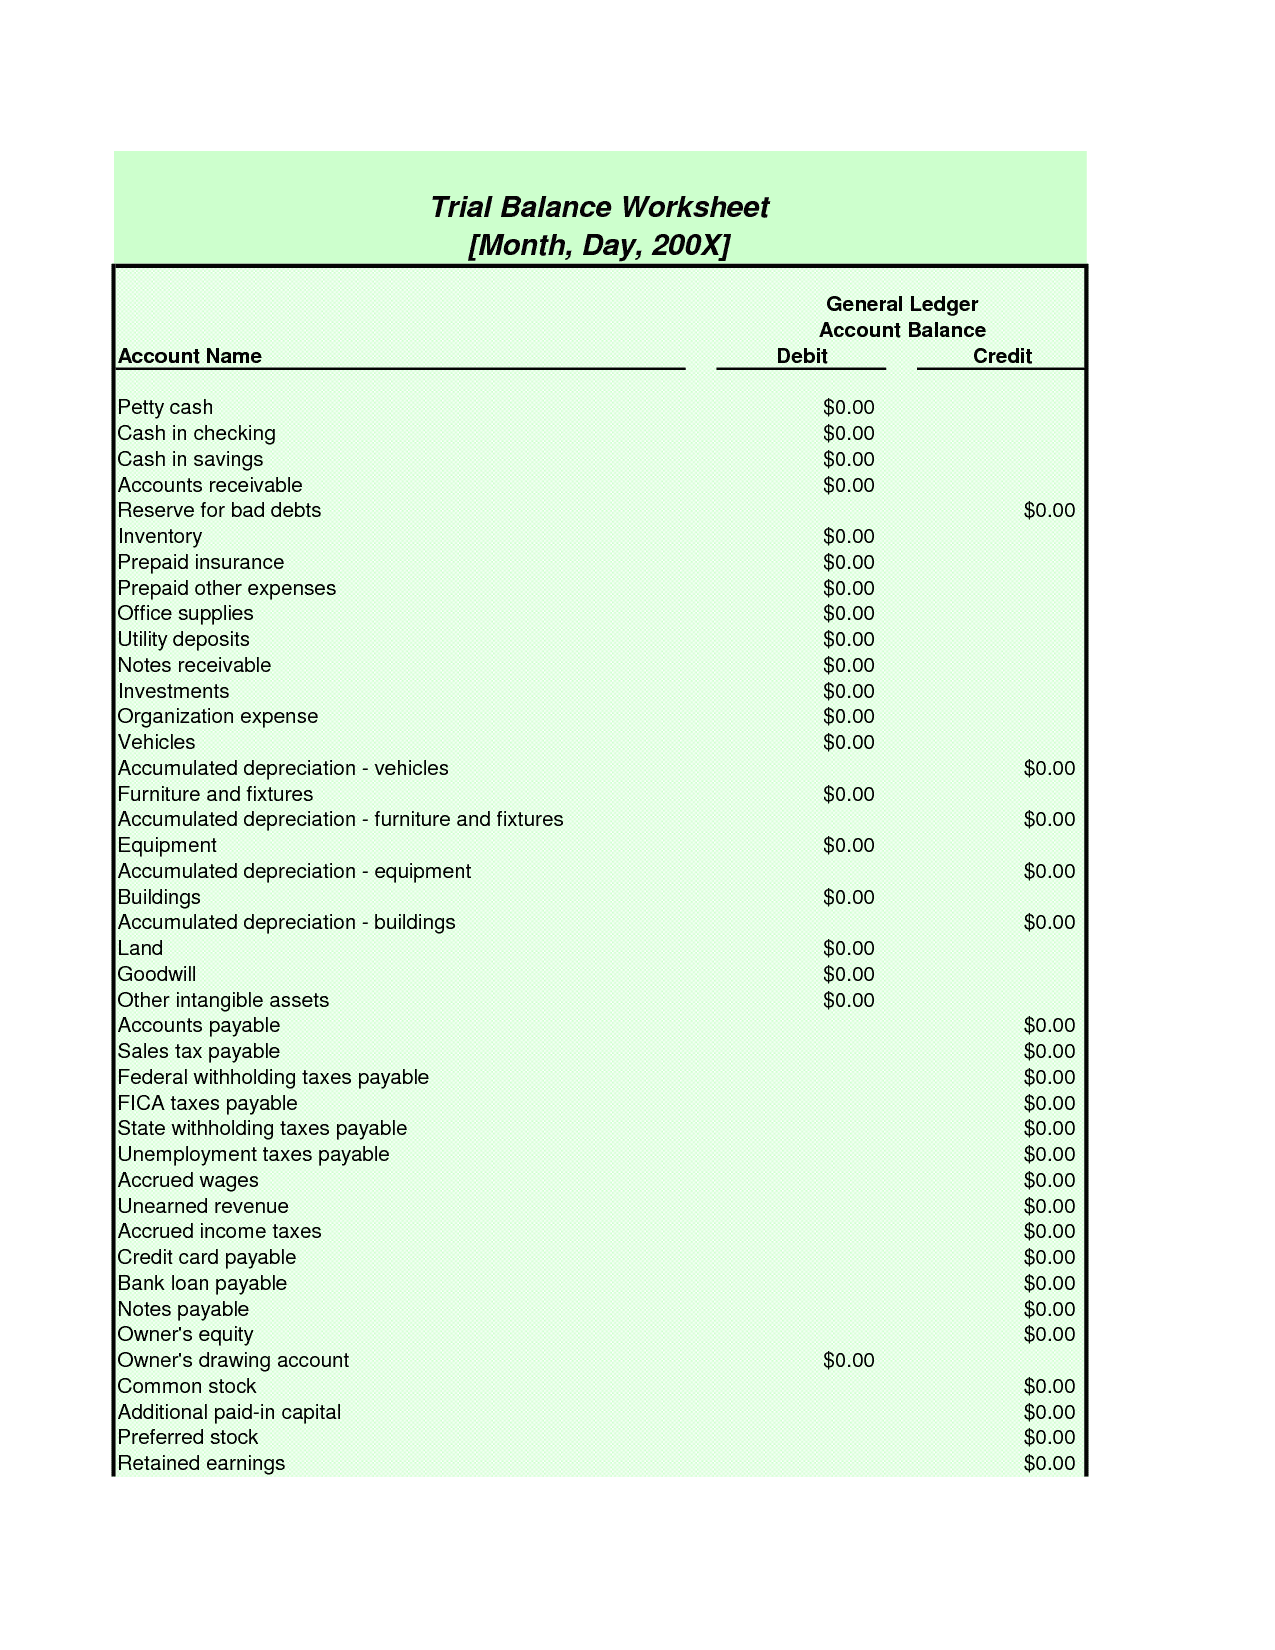 Extended Trial Balance Template Excel And Excel Trial Balance With Adjustments